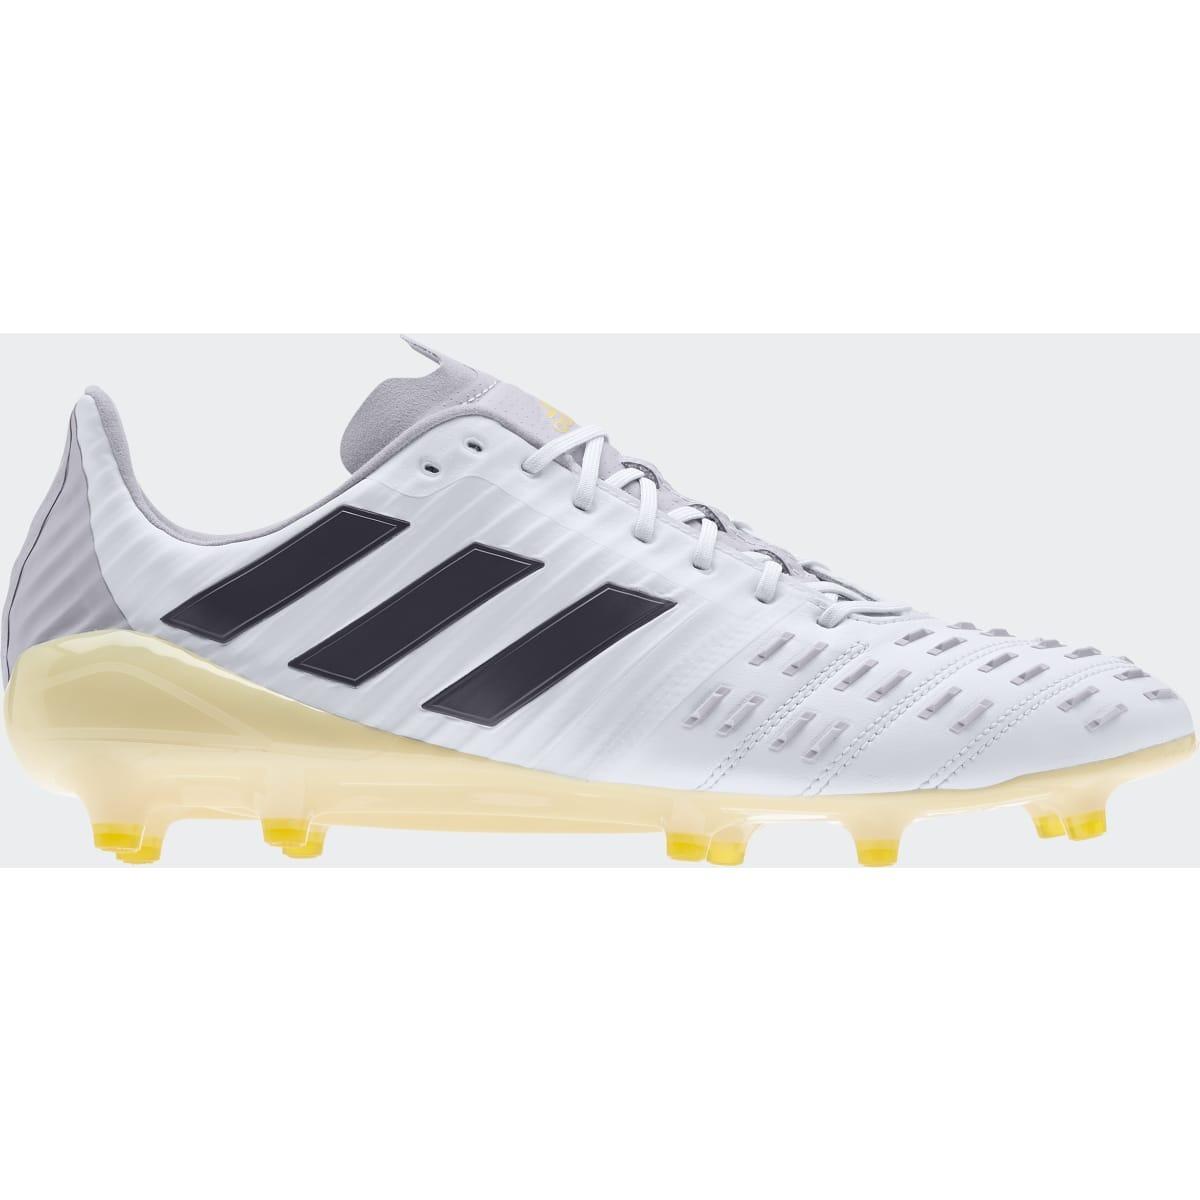 Adidas Predator Malice Control Firm Ground Rugby Boots 3/3